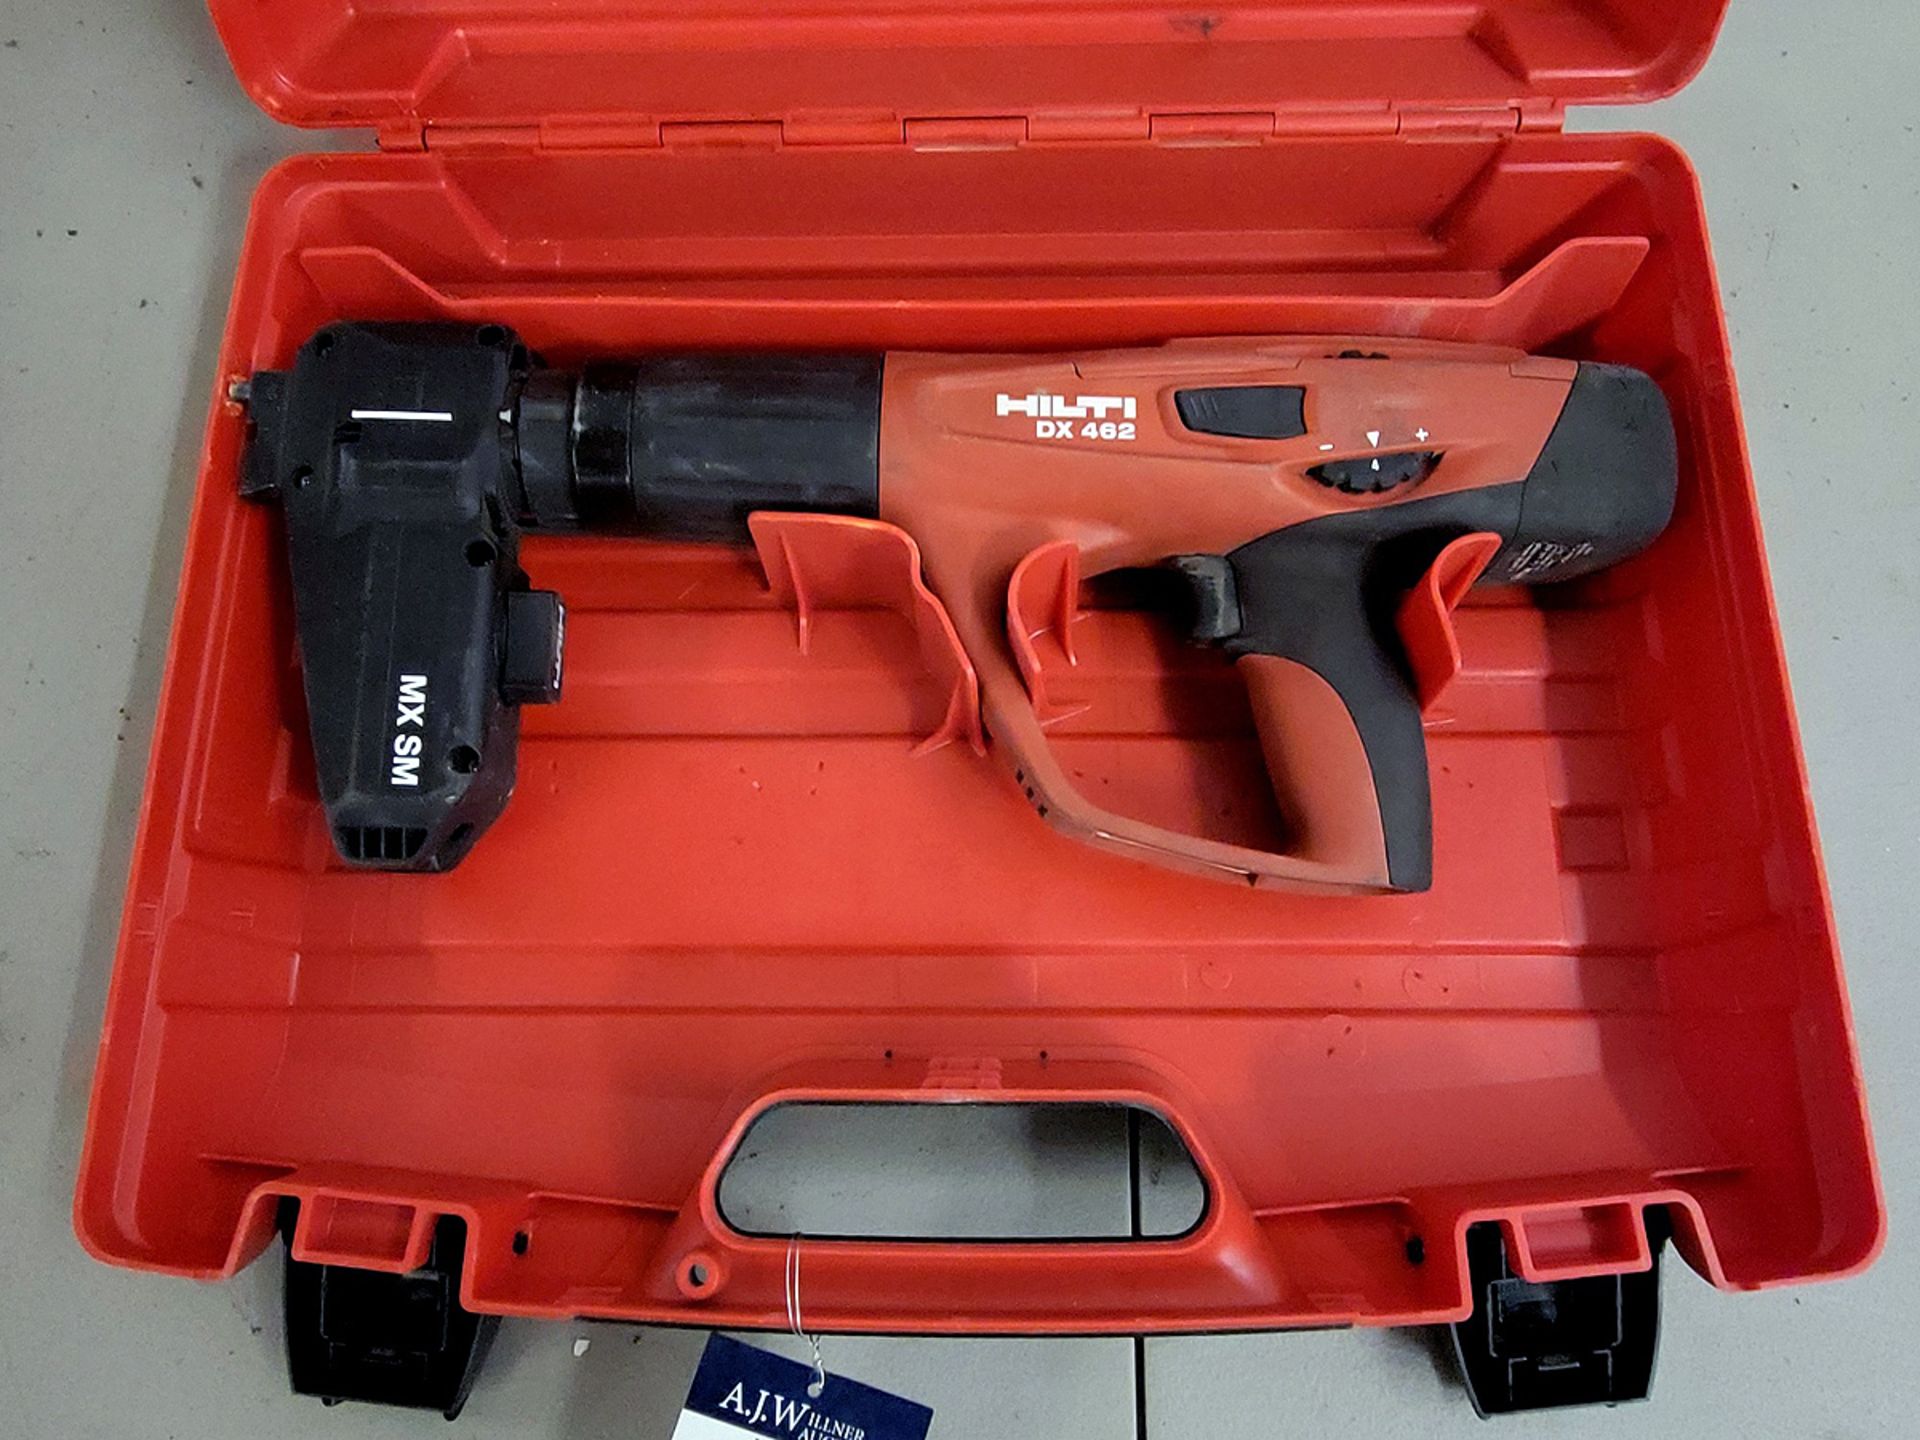 Hilti DX462 Automatic Power Actuated Fastening Tool